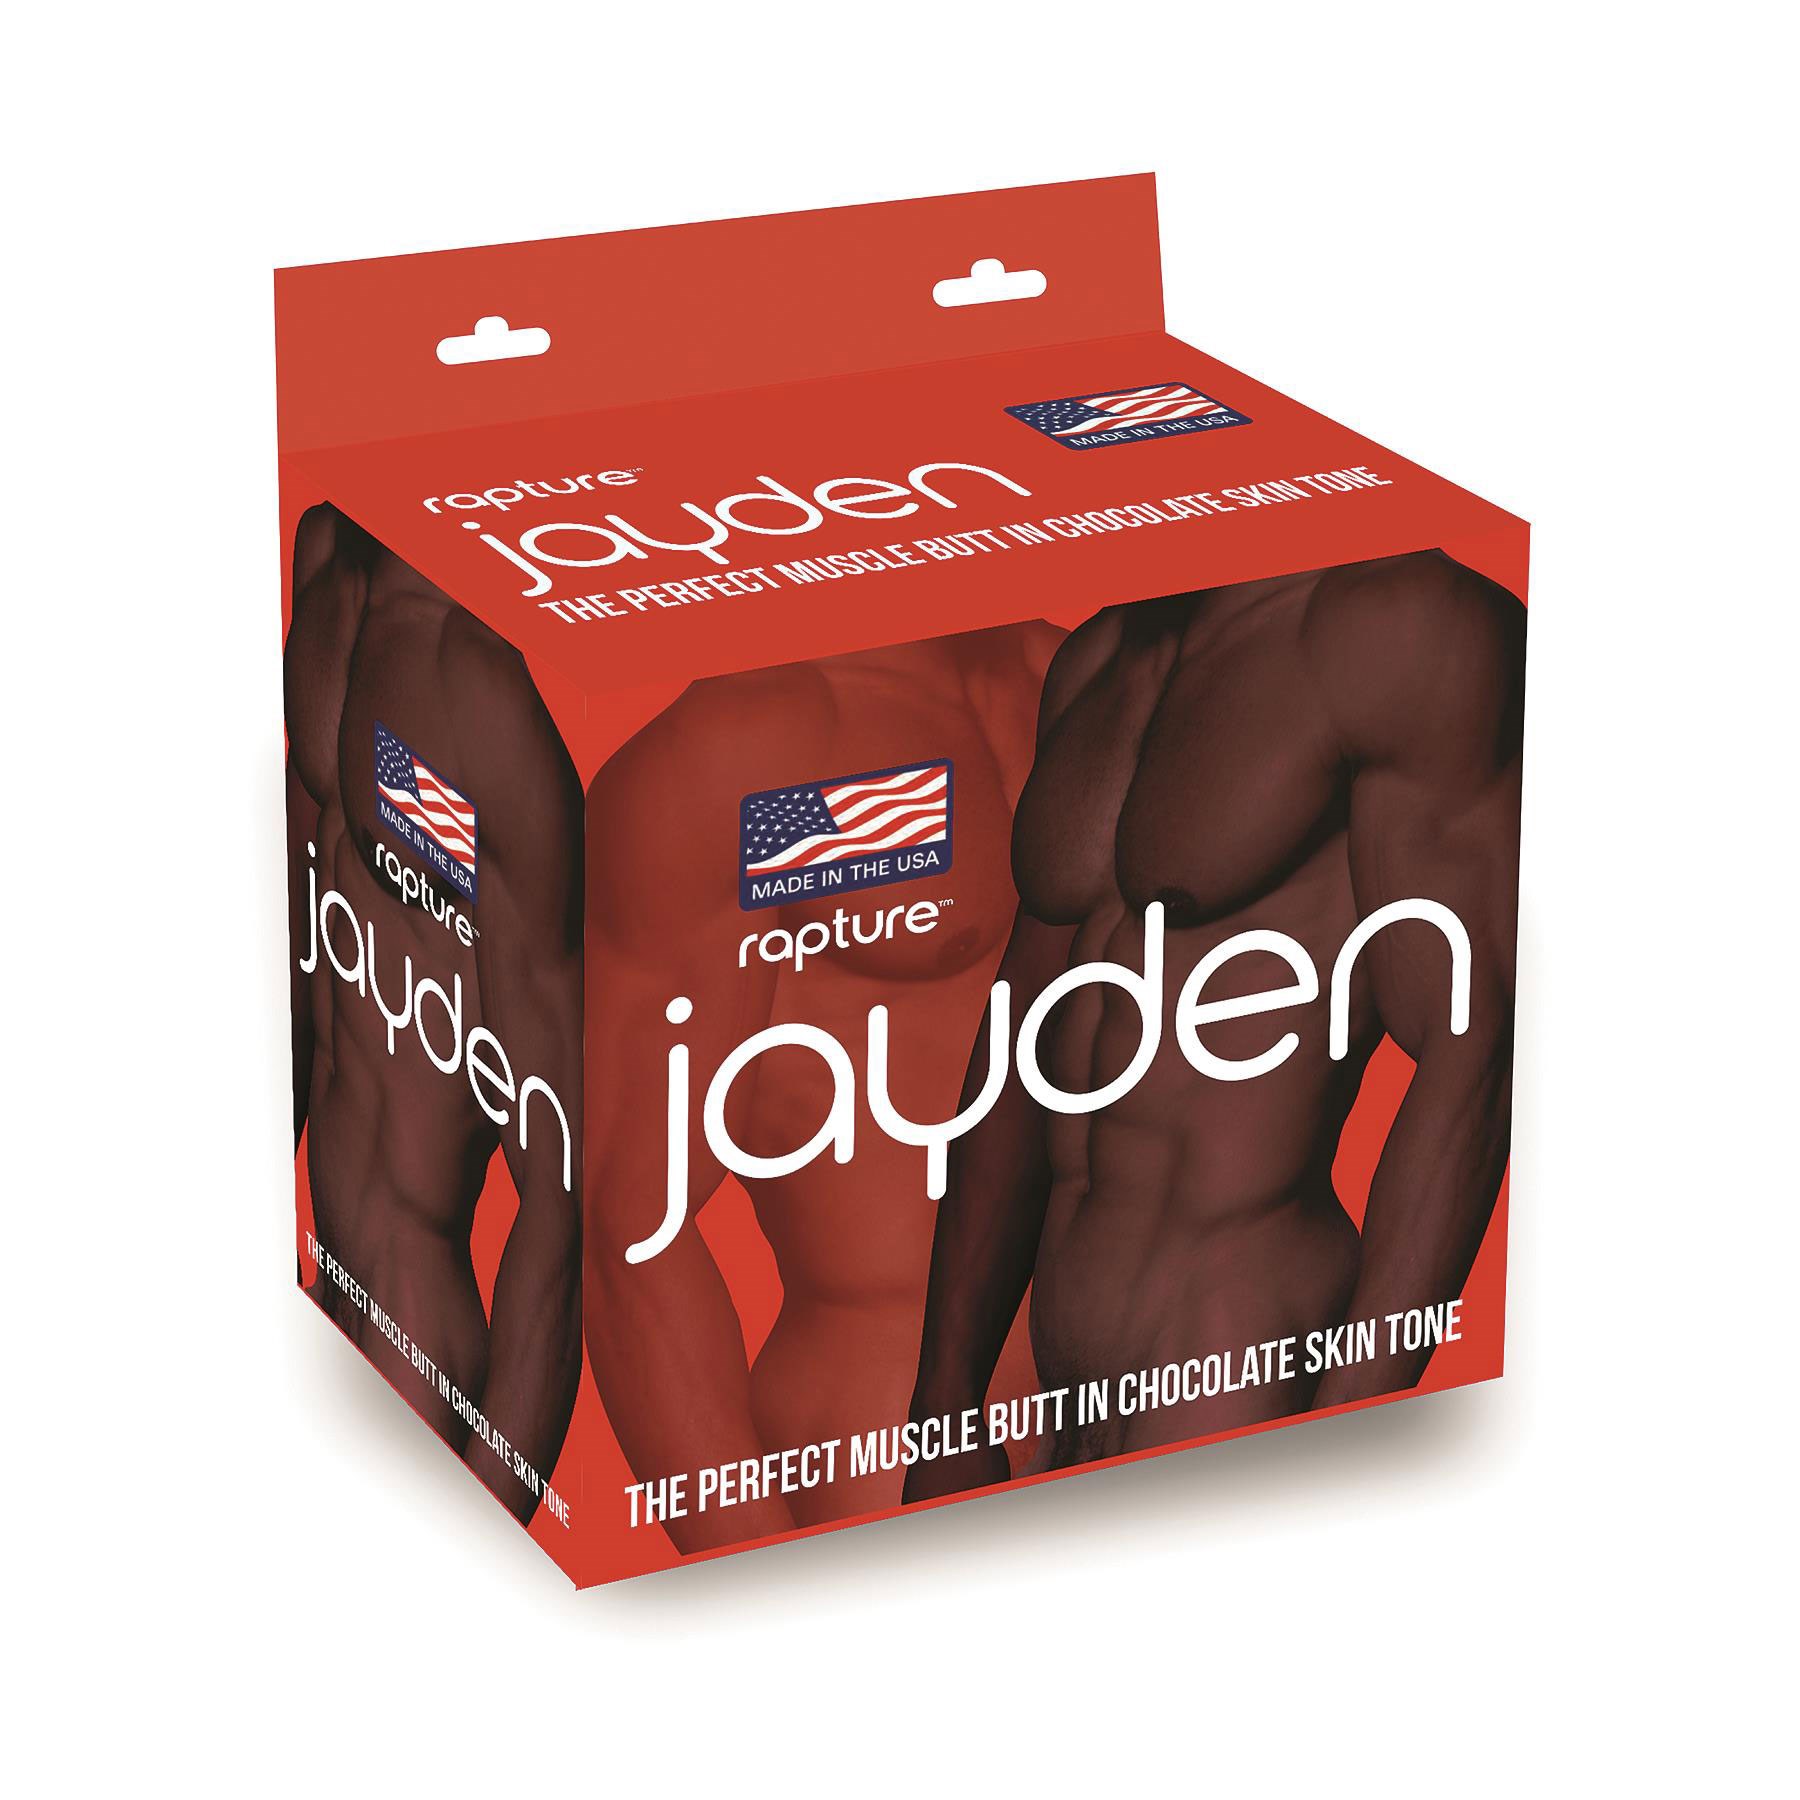 Jayden The Perfect Muscle Butt front of box